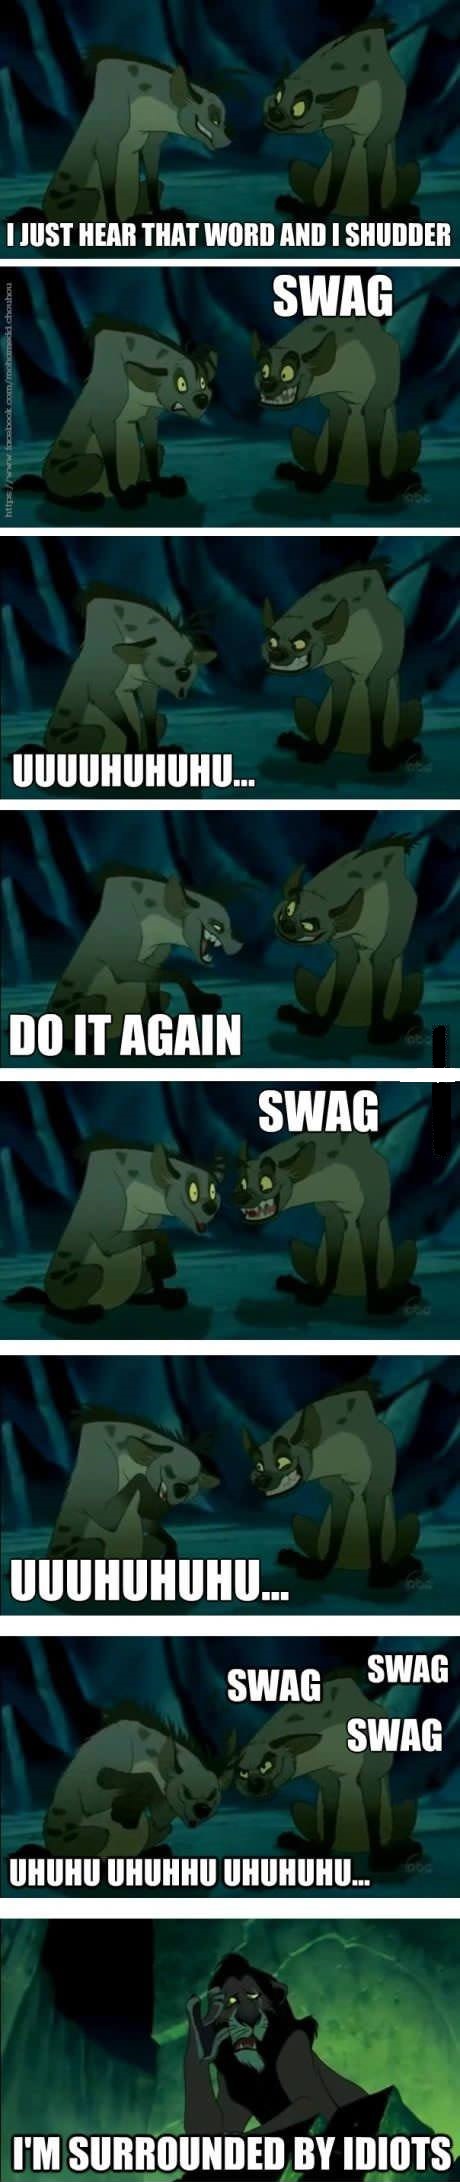 SWAG, already in the lion king